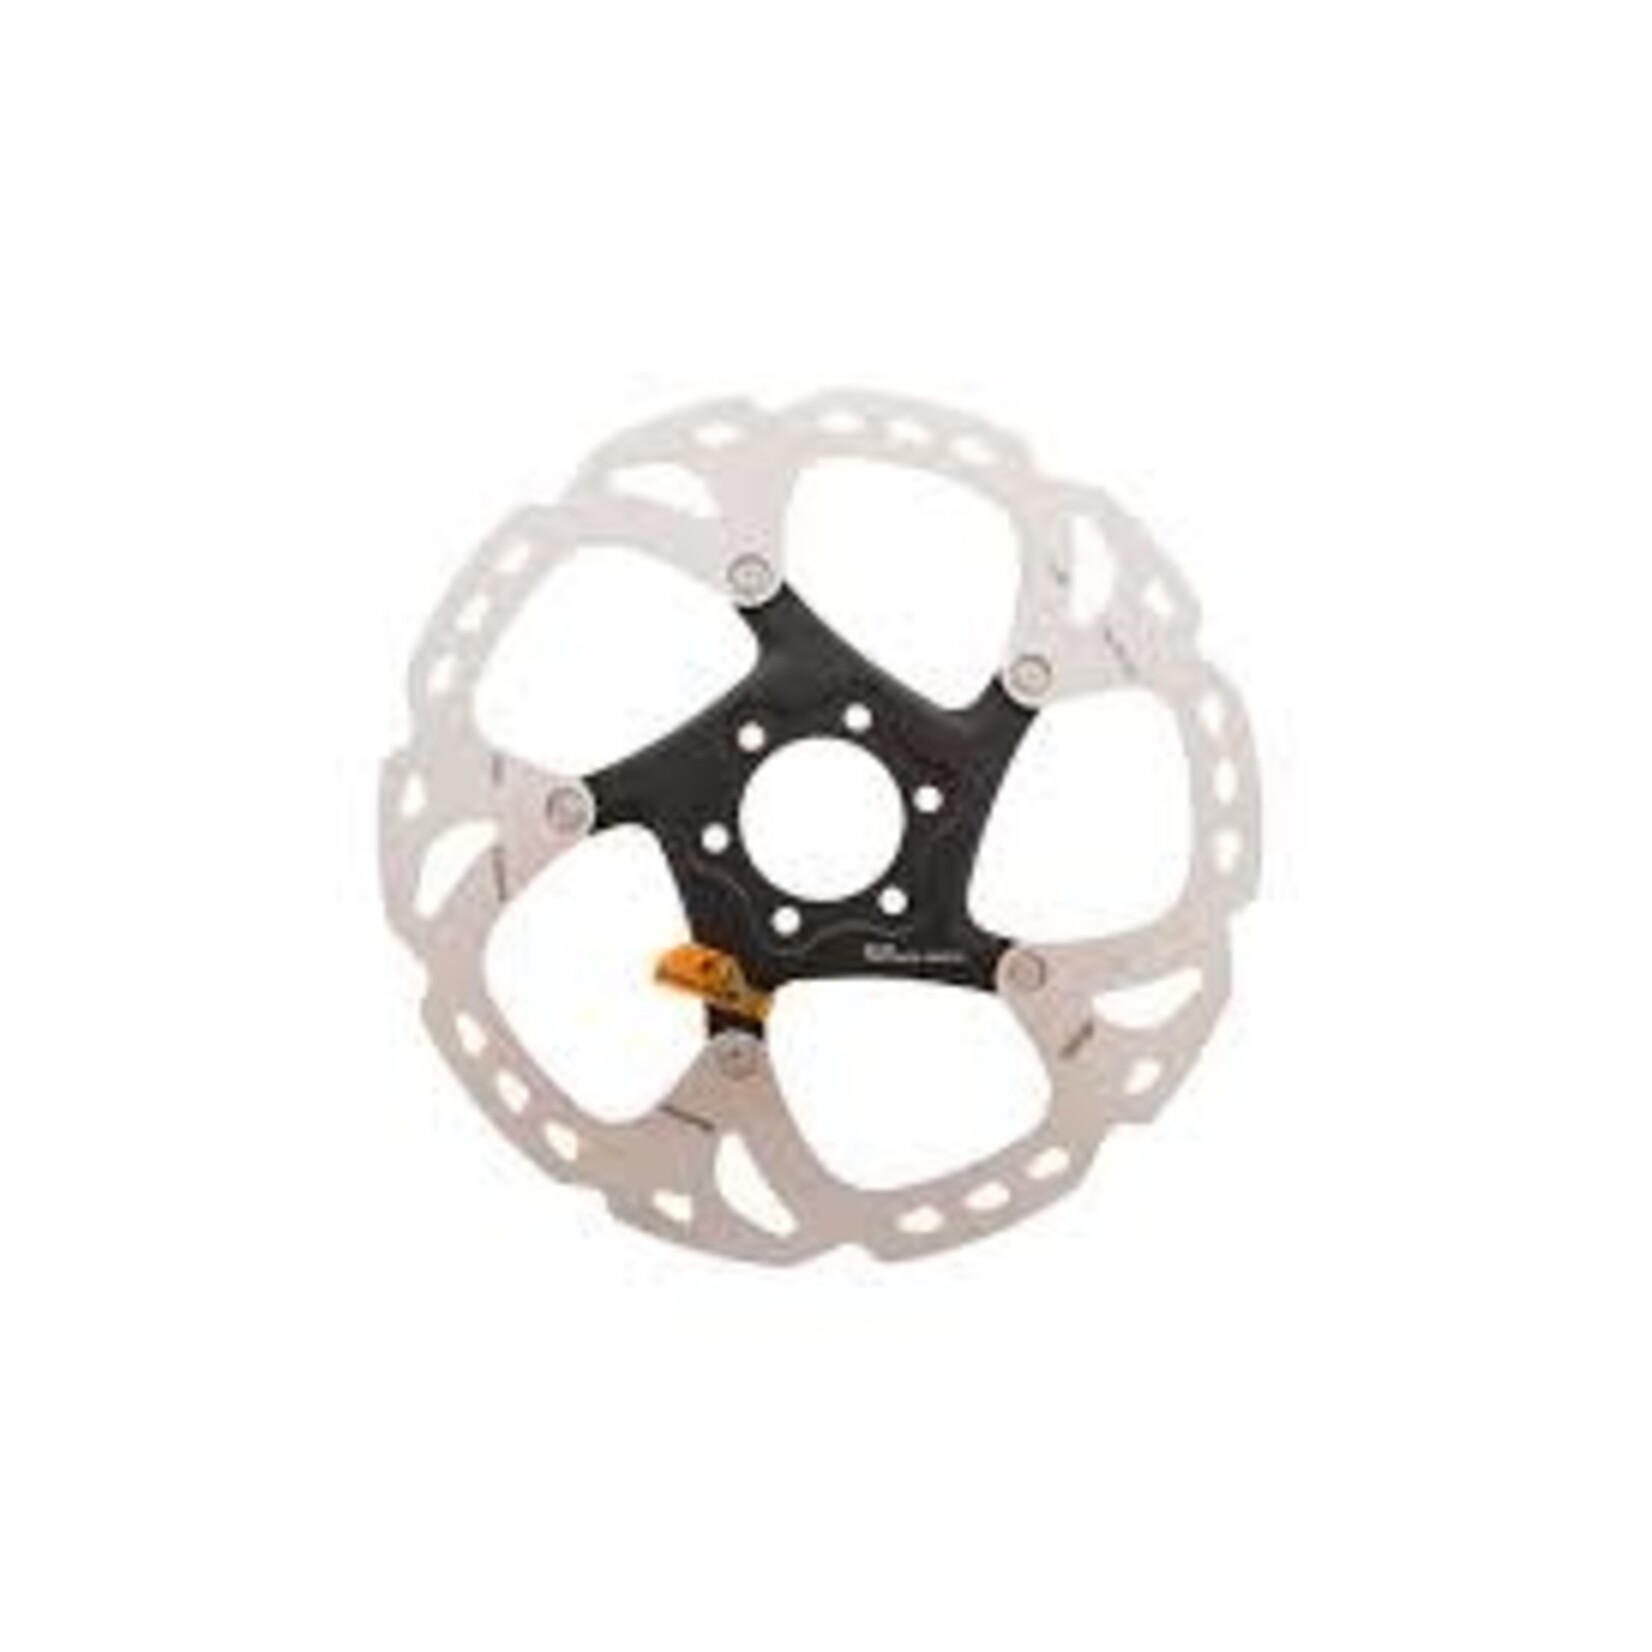 Shimano ROTOR FOR DISC BRAKE, SM-RT86, M 180MM, 6-BOLT TYPE